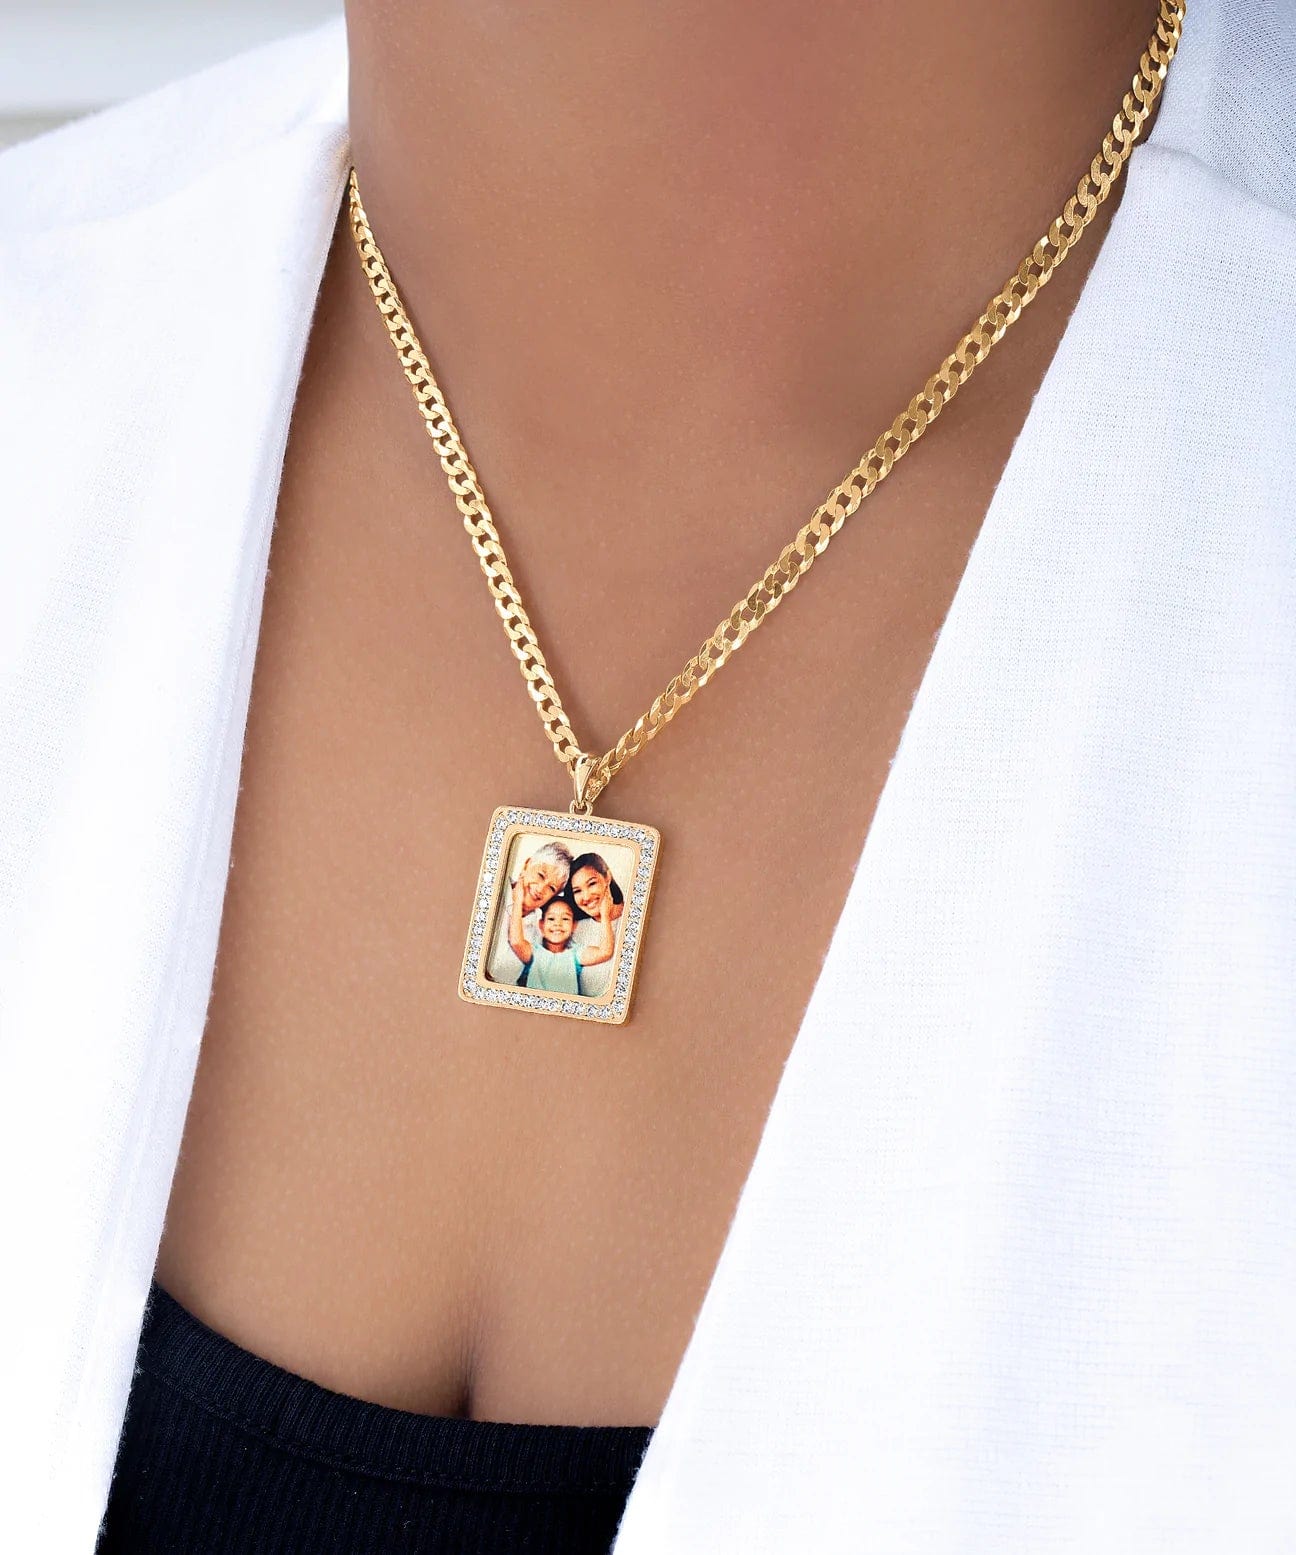 Gold Plated / Cuban Chain Iced Out Square Photo Pendant